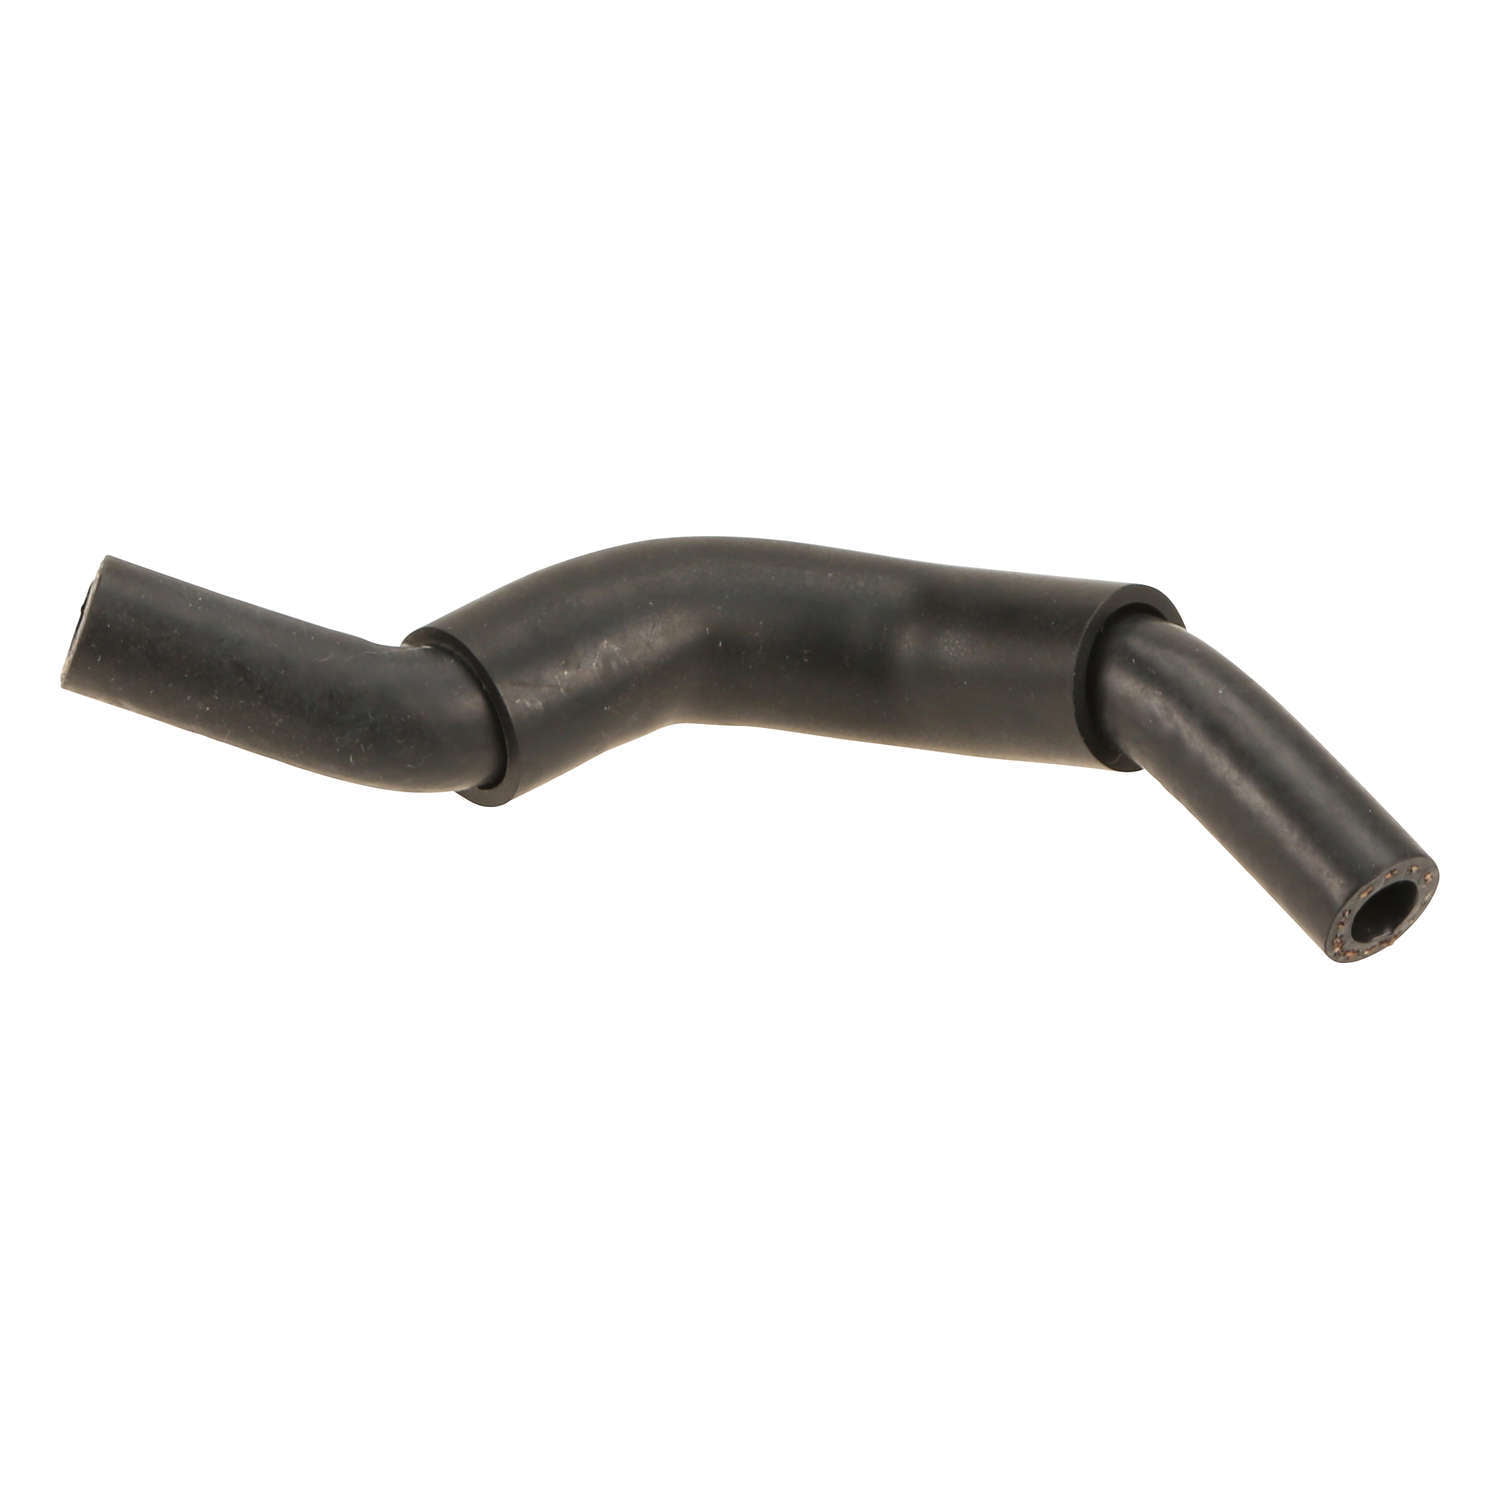 OES Genuine Cooling Hose